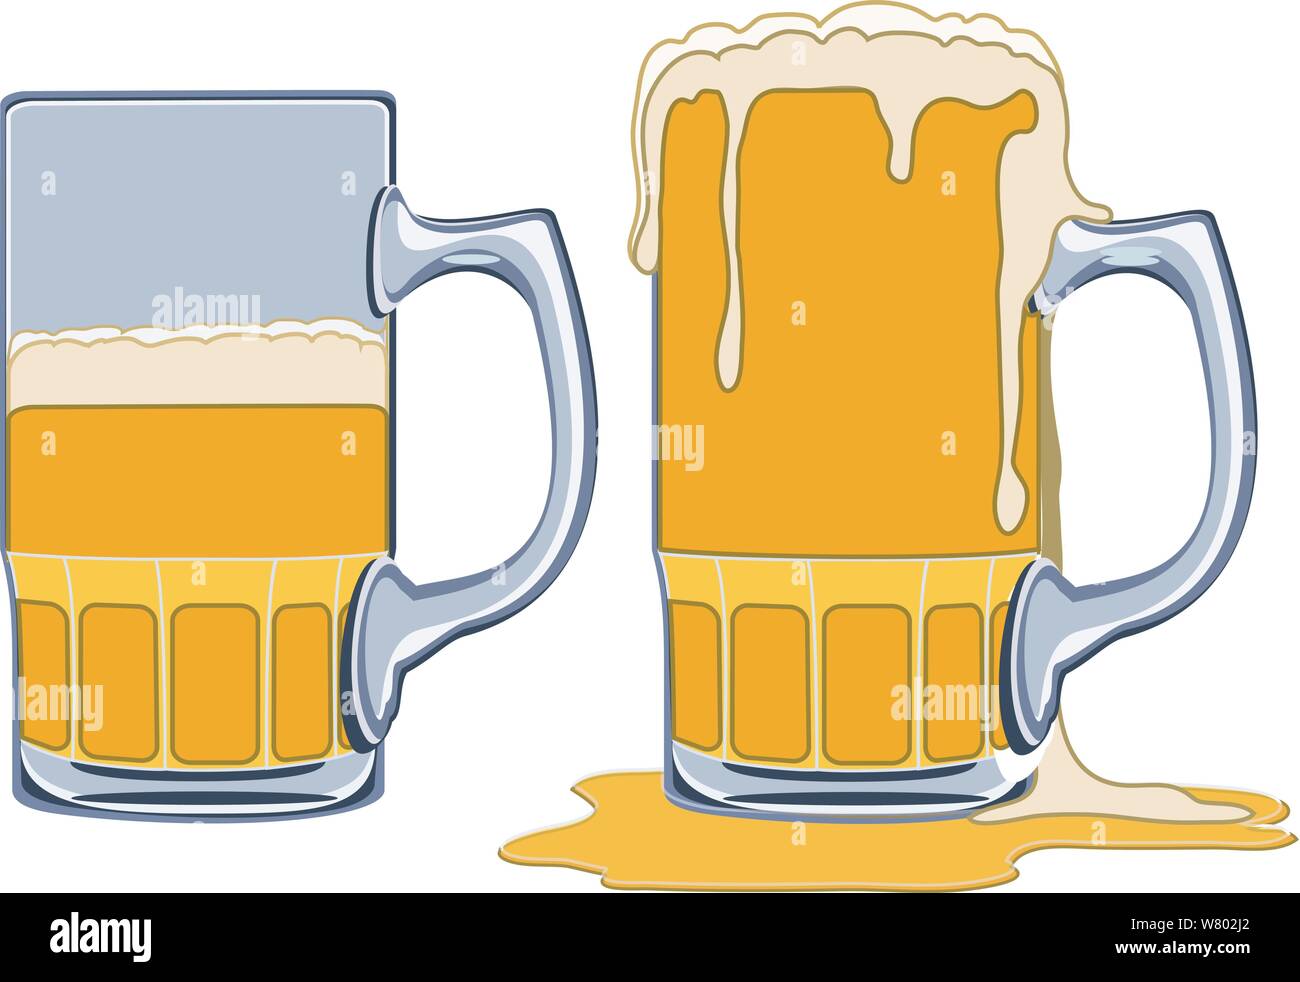 Beer Glass Half Full or half empty. One mug is overflowing and spilling over onto the ground. Stock Vector